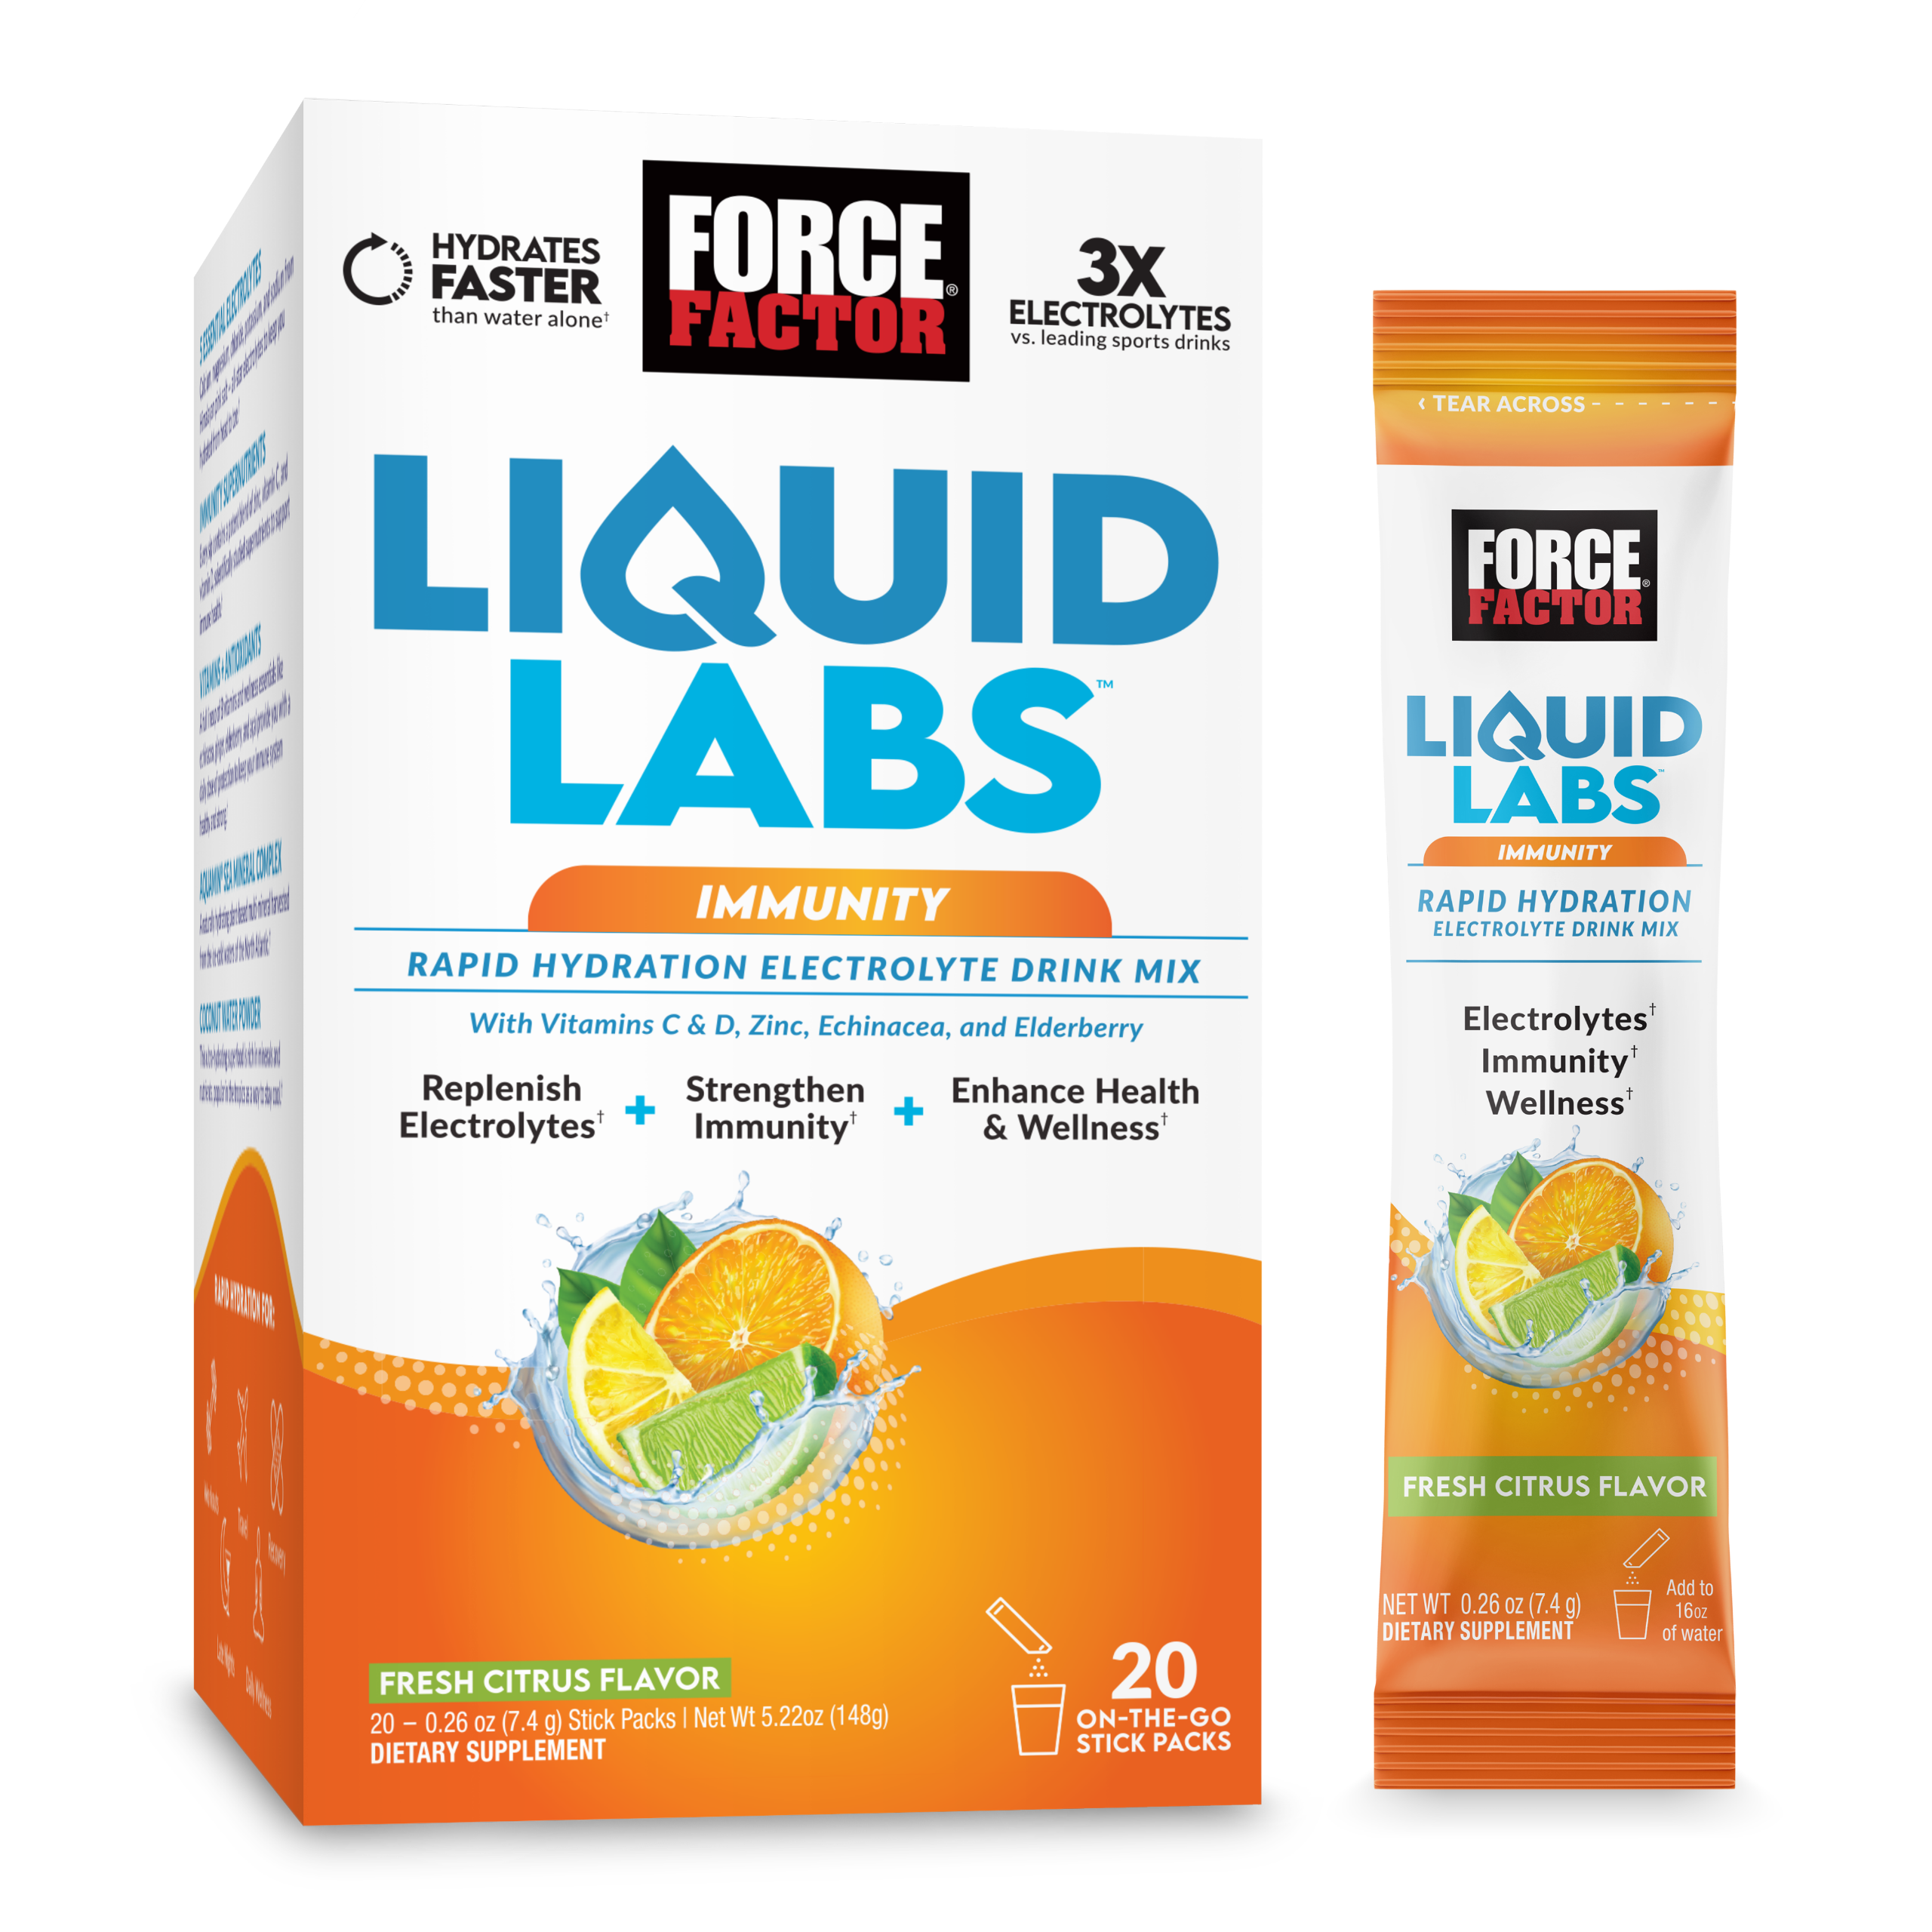 Force Factor Liquid Labs Immunity Electrolytes Powder, Hydration Drink Packets, Citrus, 20 Stick Packs, Size: 7.4 grams